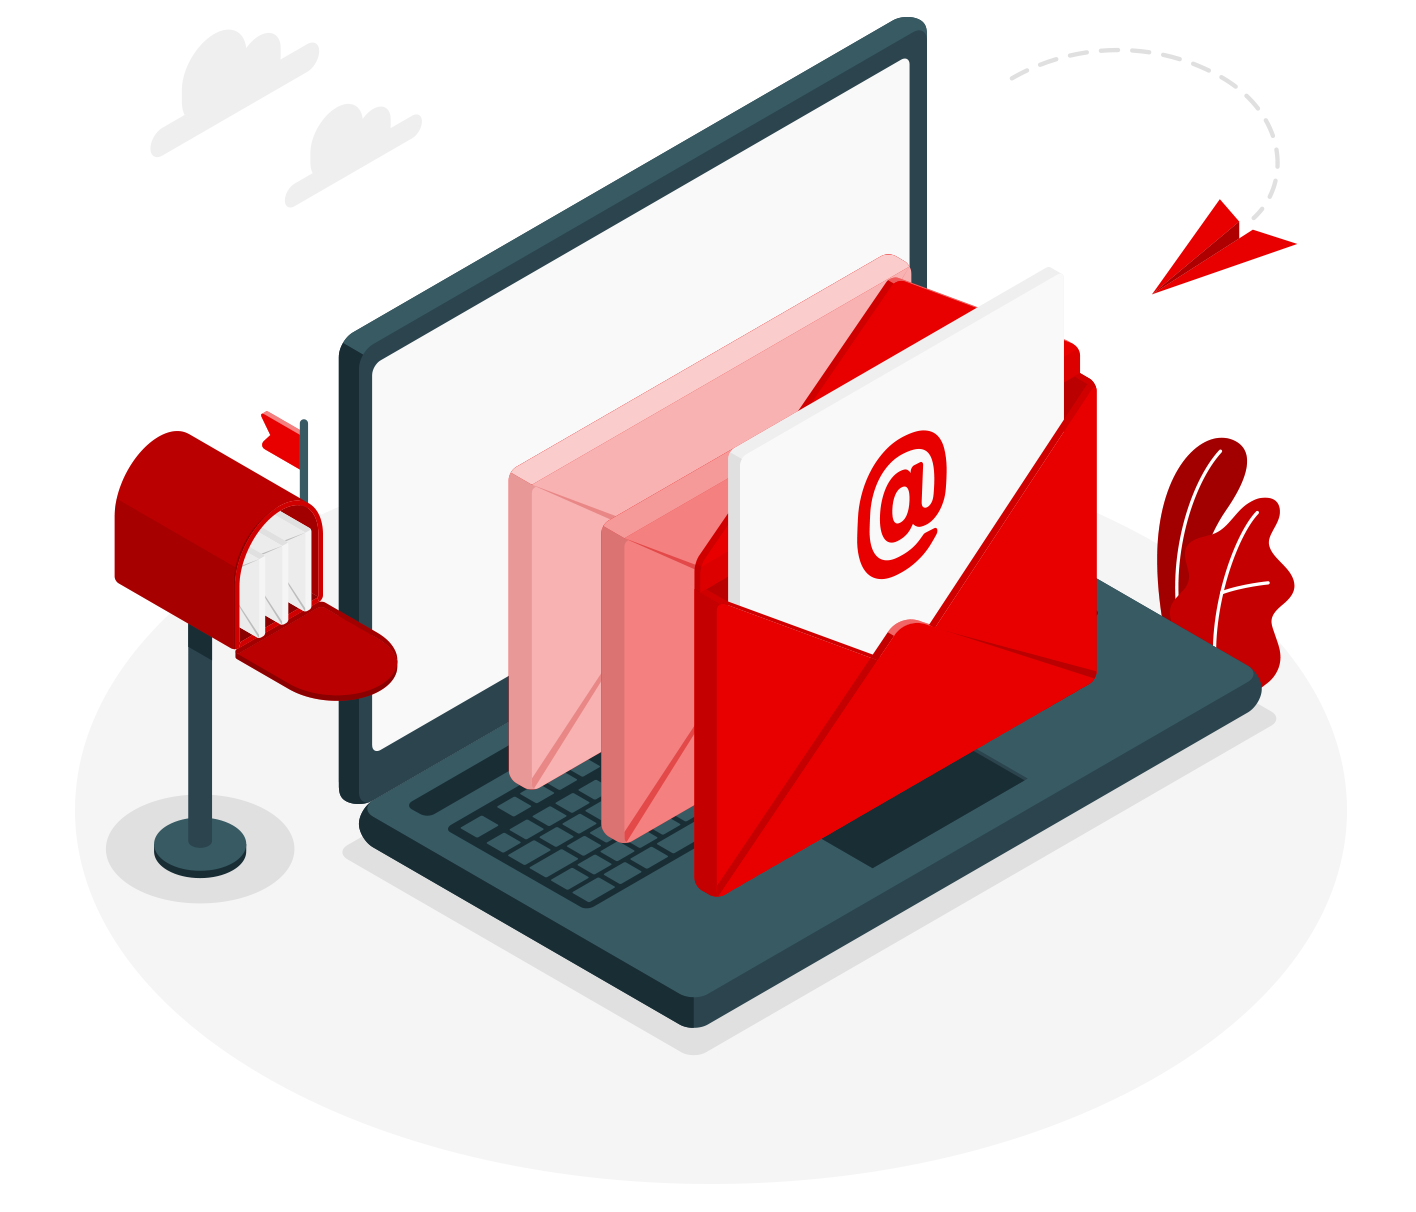 About MailMate